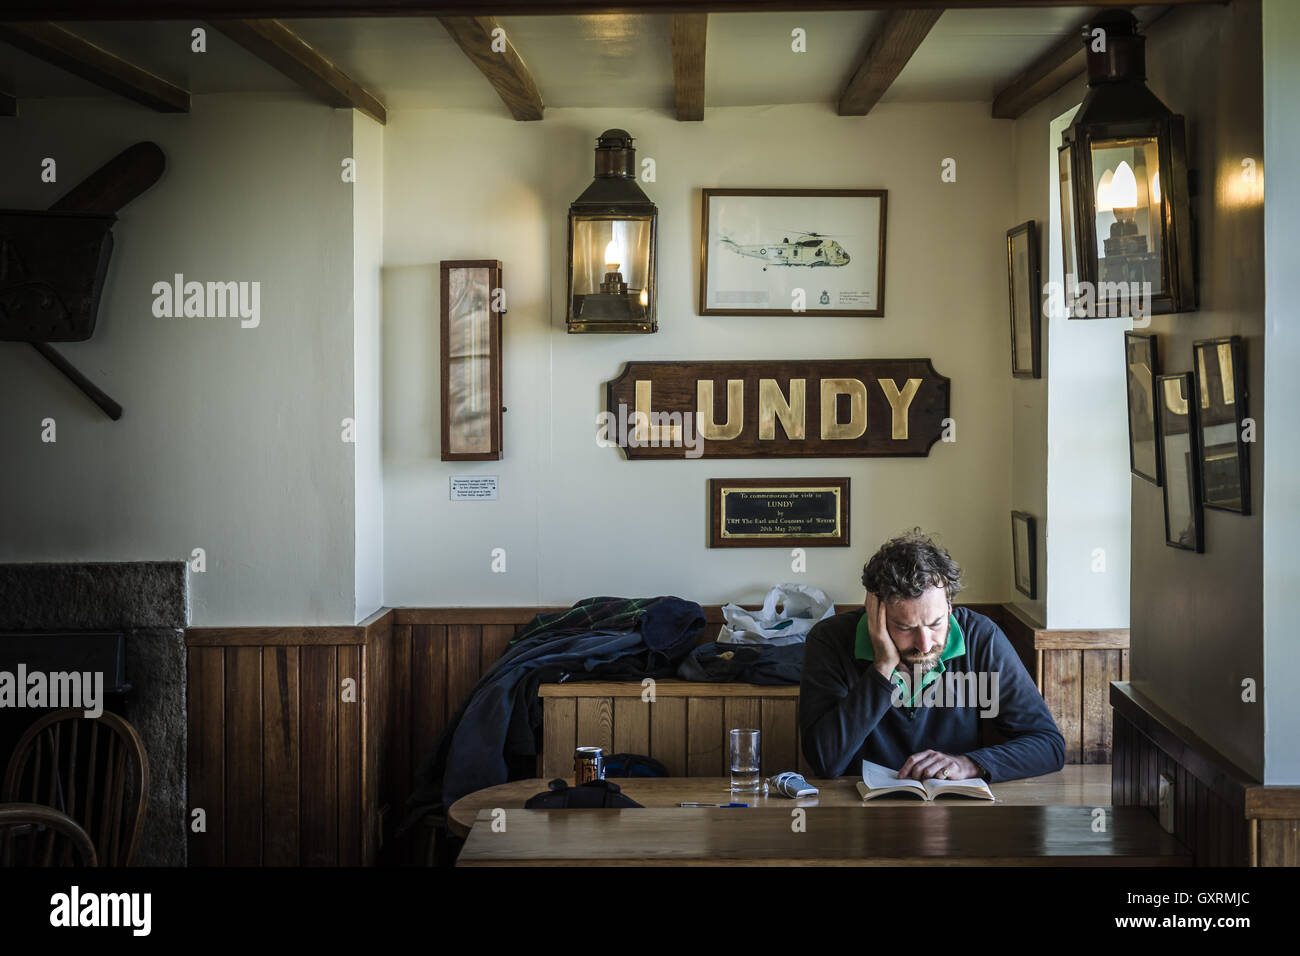 A man sits reading his book, illuminated by the light from a window, in the Marisco Tavern on Island. Stock Photo